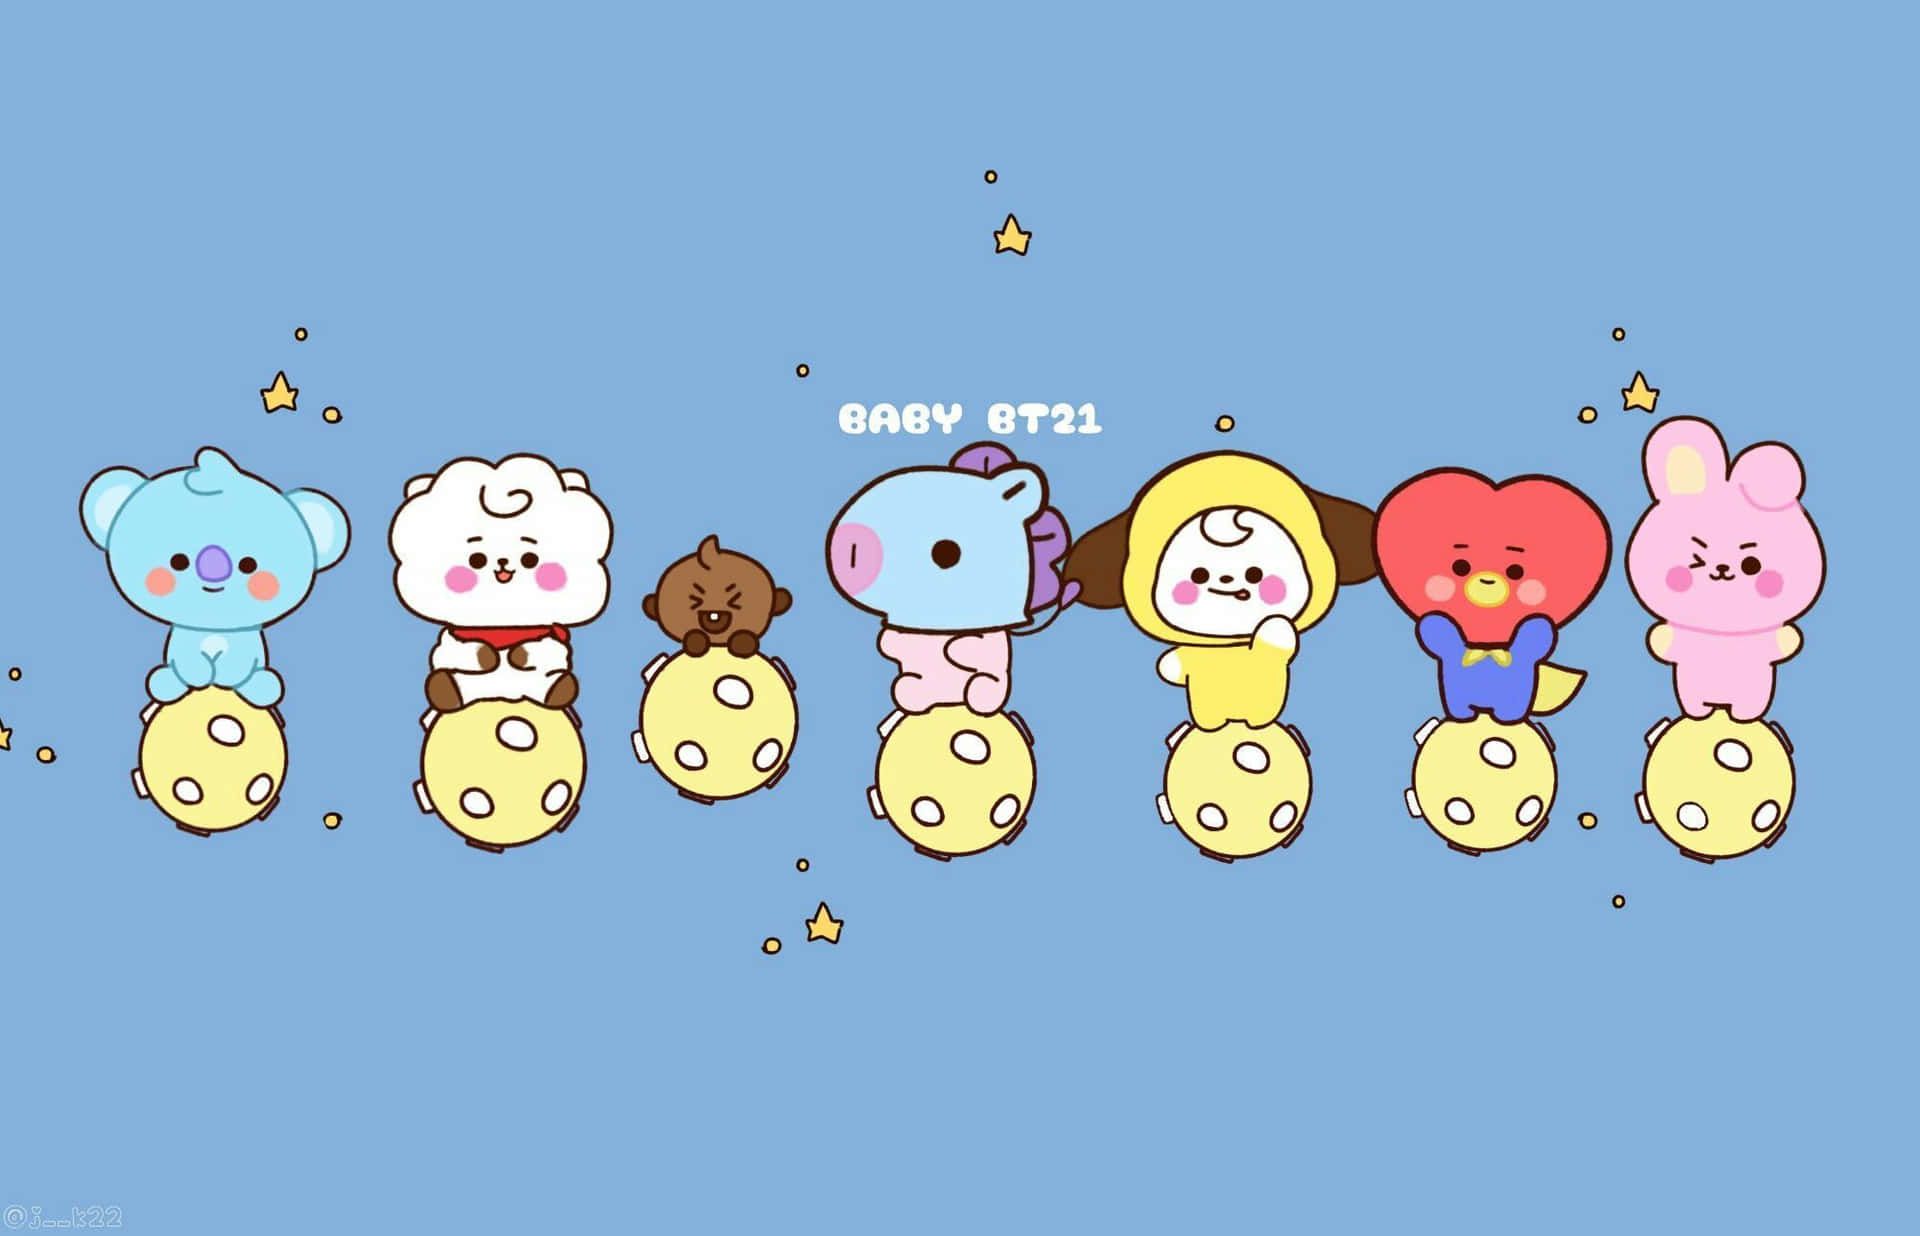 BTS's agency, Big Hit Entertainment, recently released a new BT21 character, a baby version of the original 7 BT21 characters. - BT21